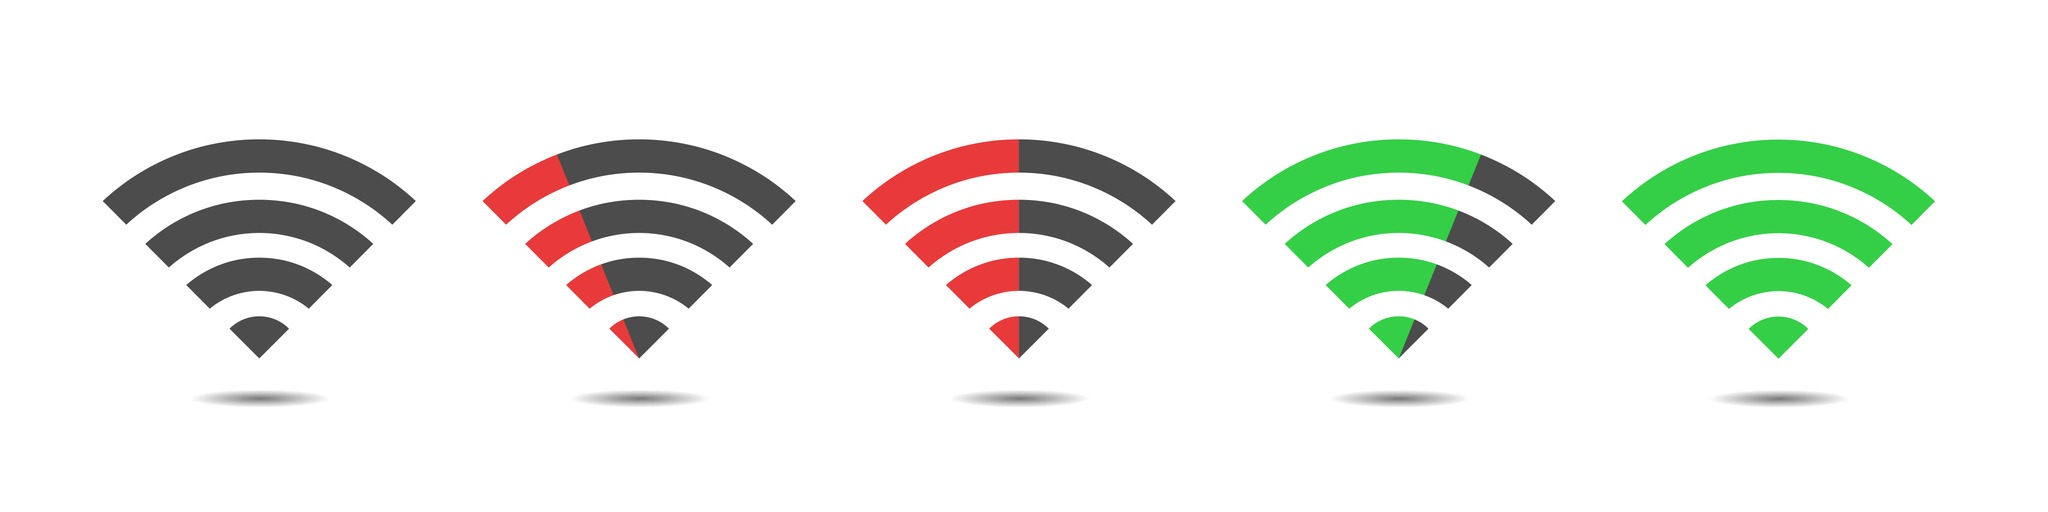 Wi fi vector icons. Wireless technology, Vector illustration